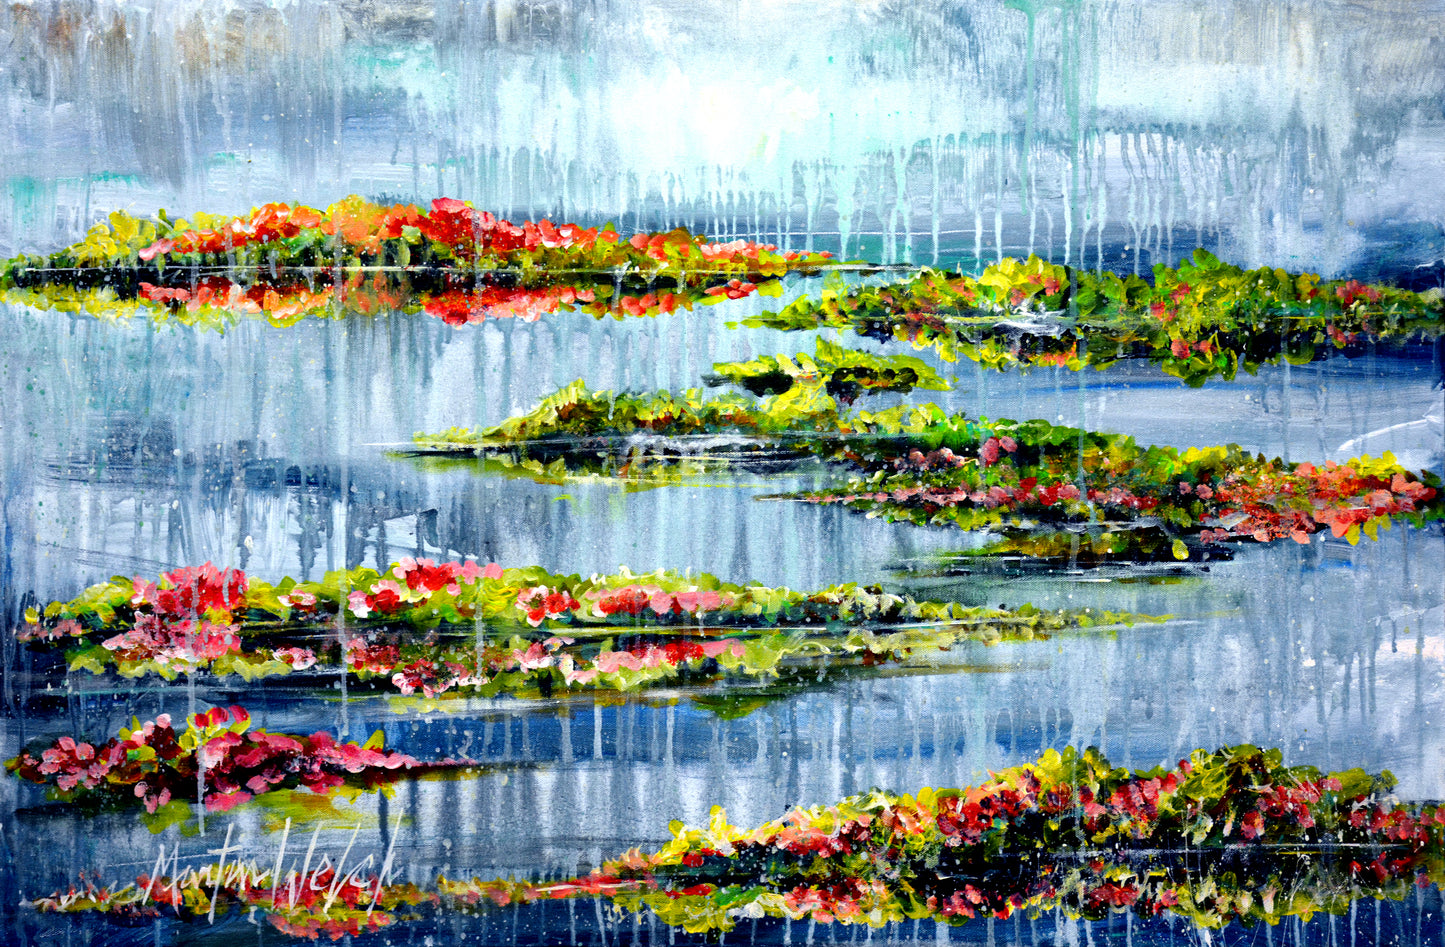 "Tipo" Original Painting with Water Lilies 24x36